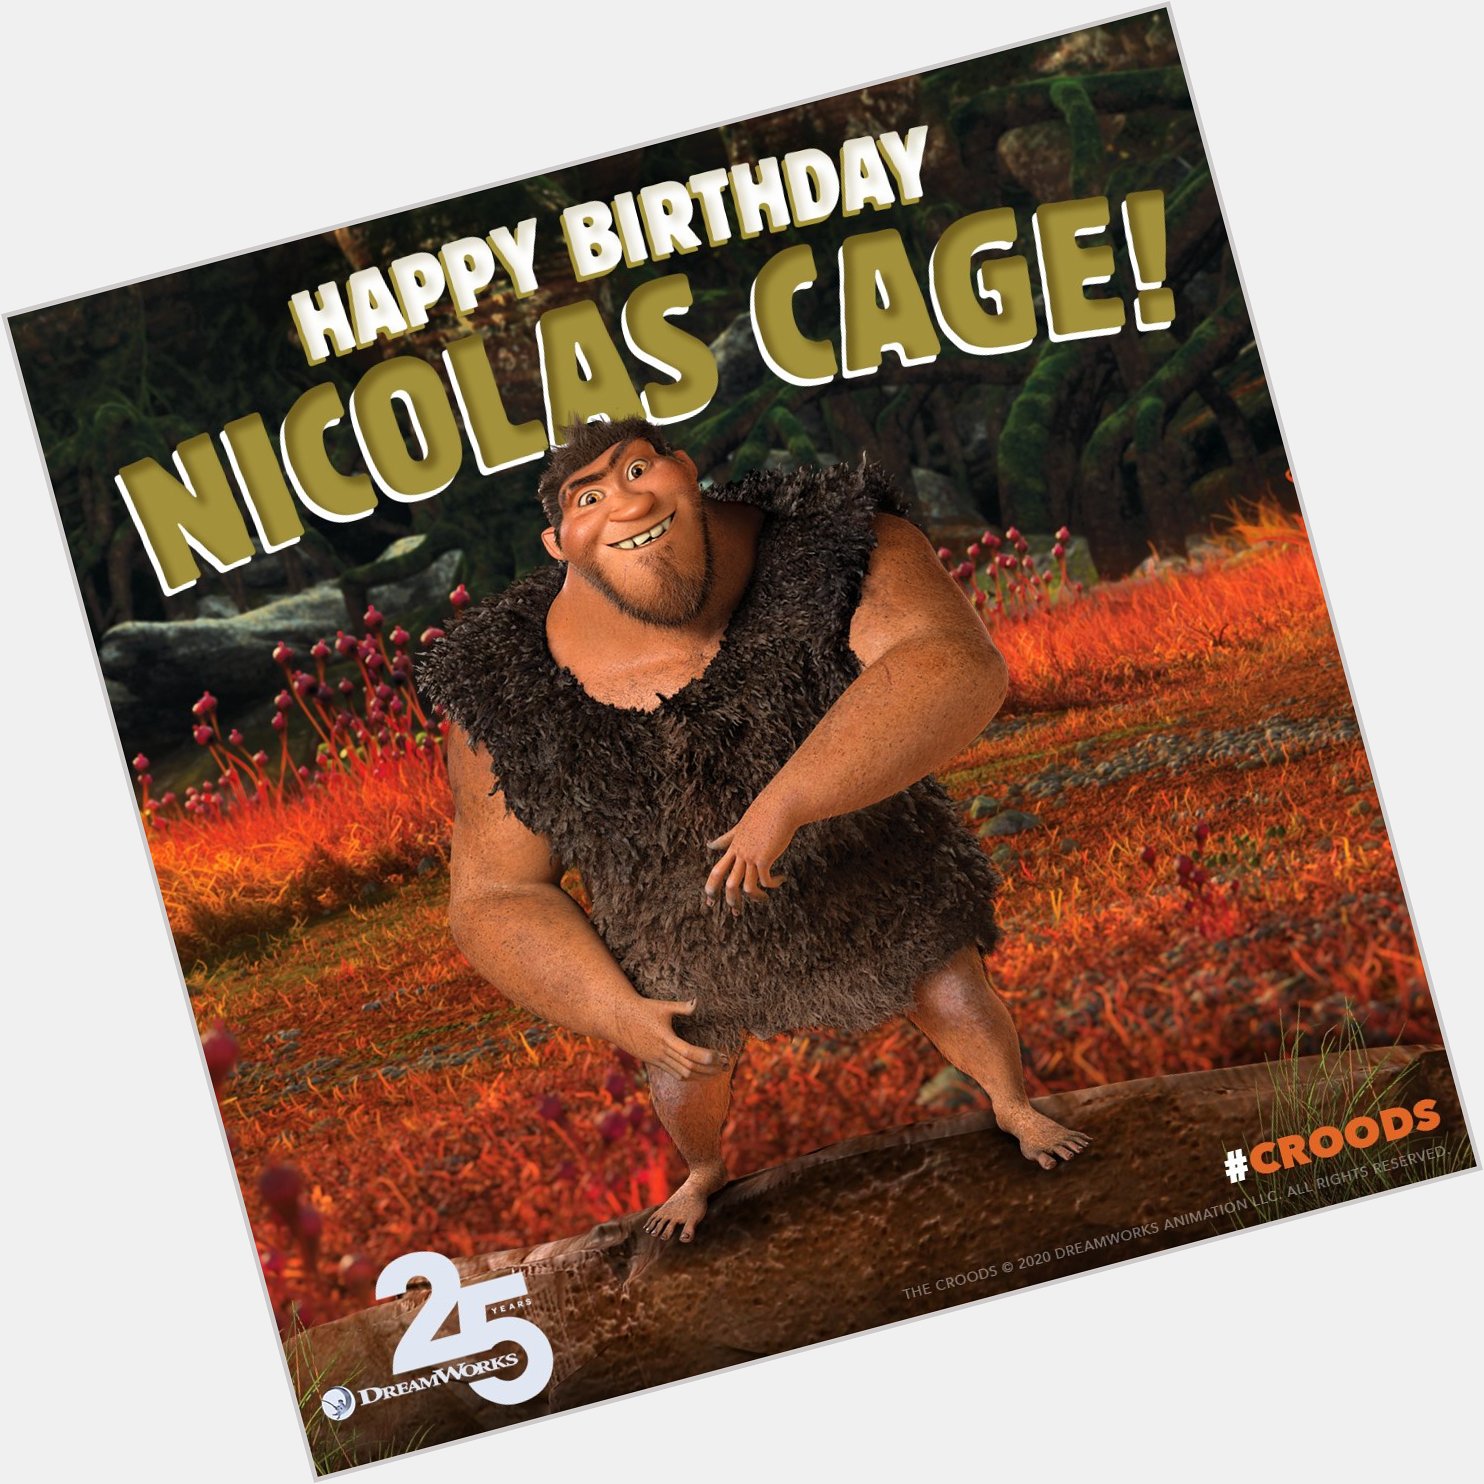 One of the wildest in history was born today! Happy birthday, Nicolas Cage!  